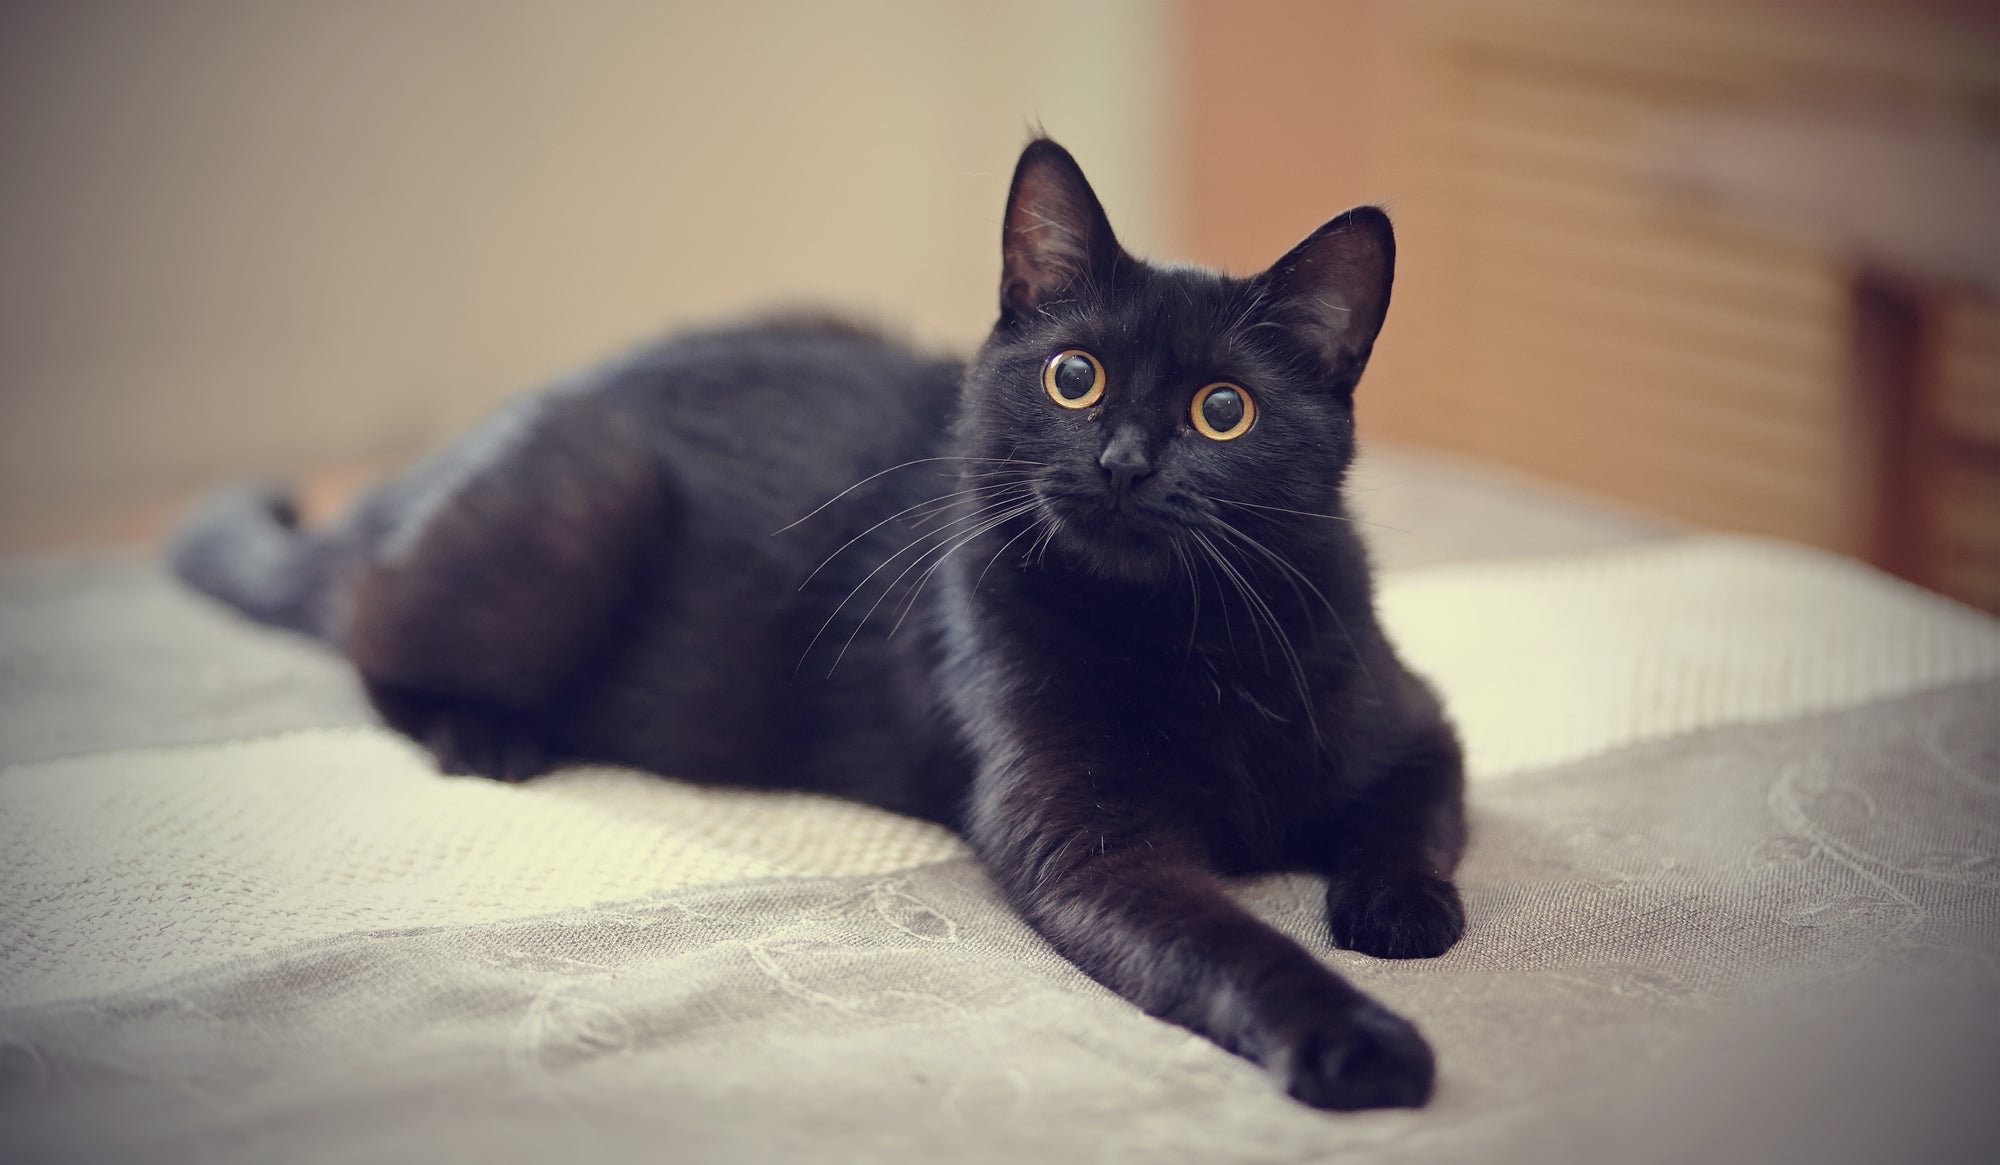 6 Fascinating Facts About Black Cats